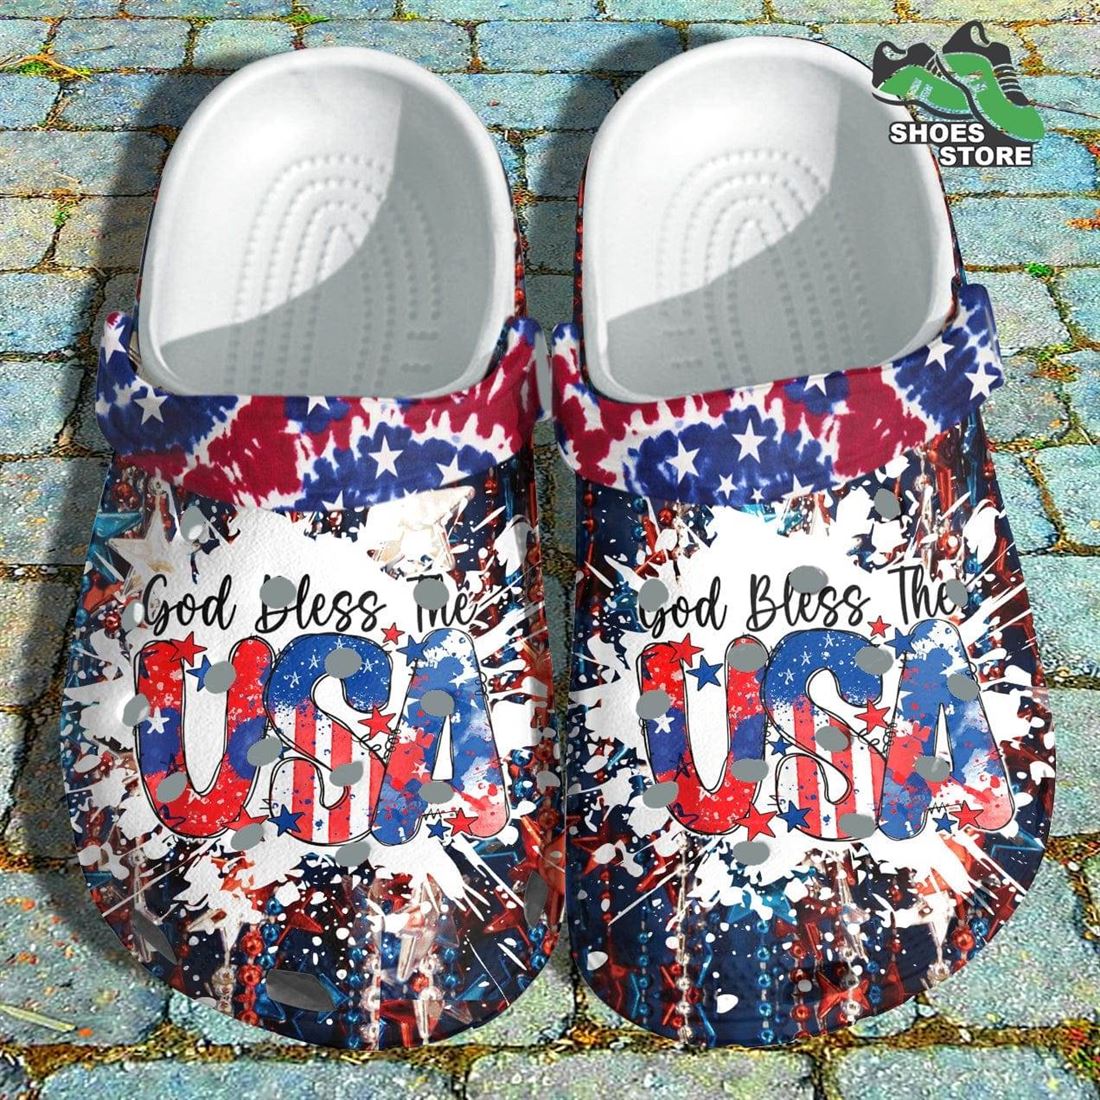 God Bless the USA America Flag Shoes Crocs Hippie Tie Dye US Proud Twinkle Star th Of July Shoes